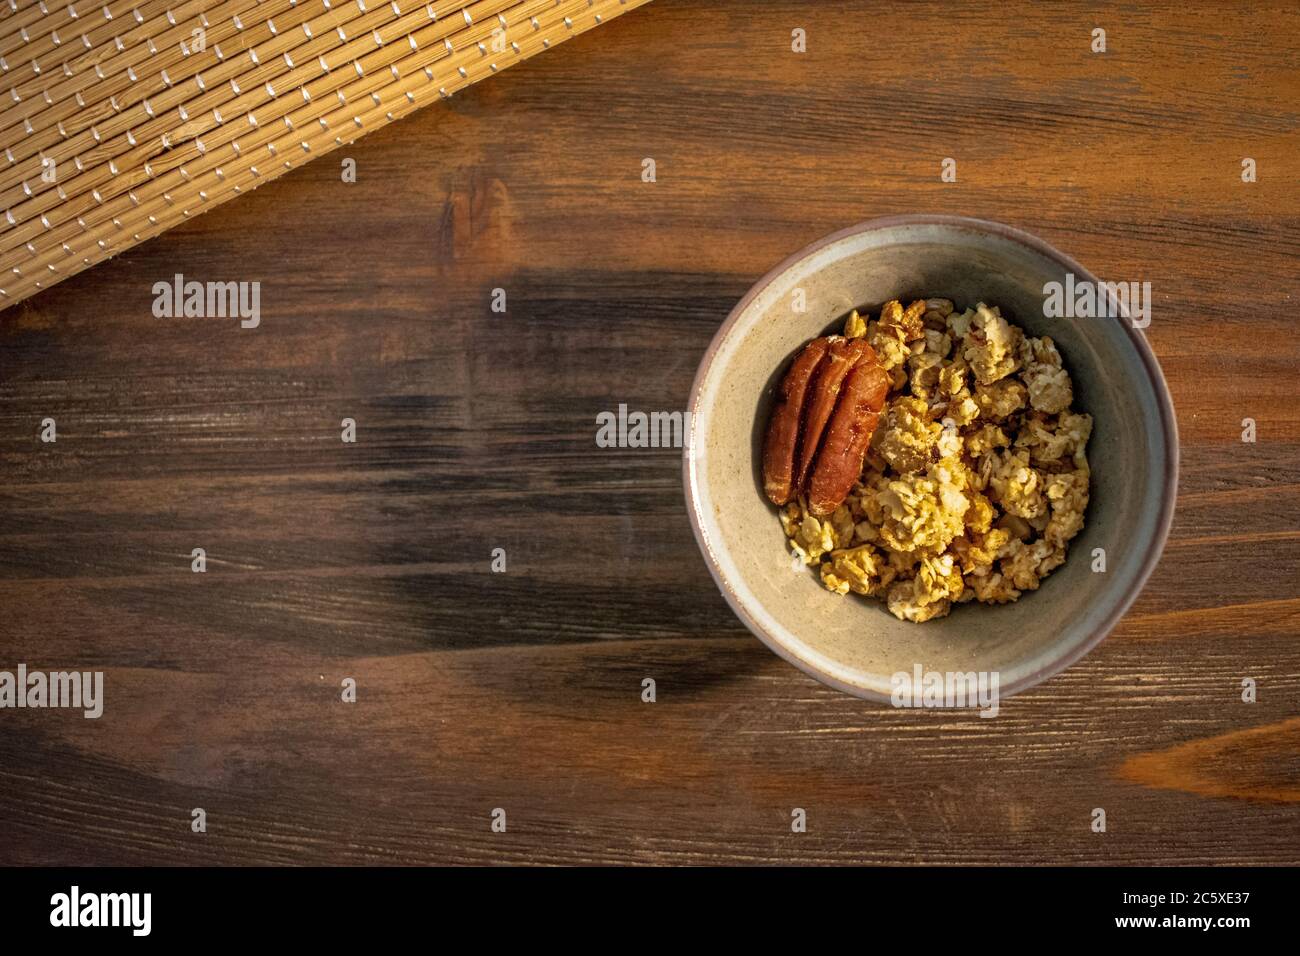 Top view of healthy food, granola bowl with pecan in wooden background and copy space Stock Photo